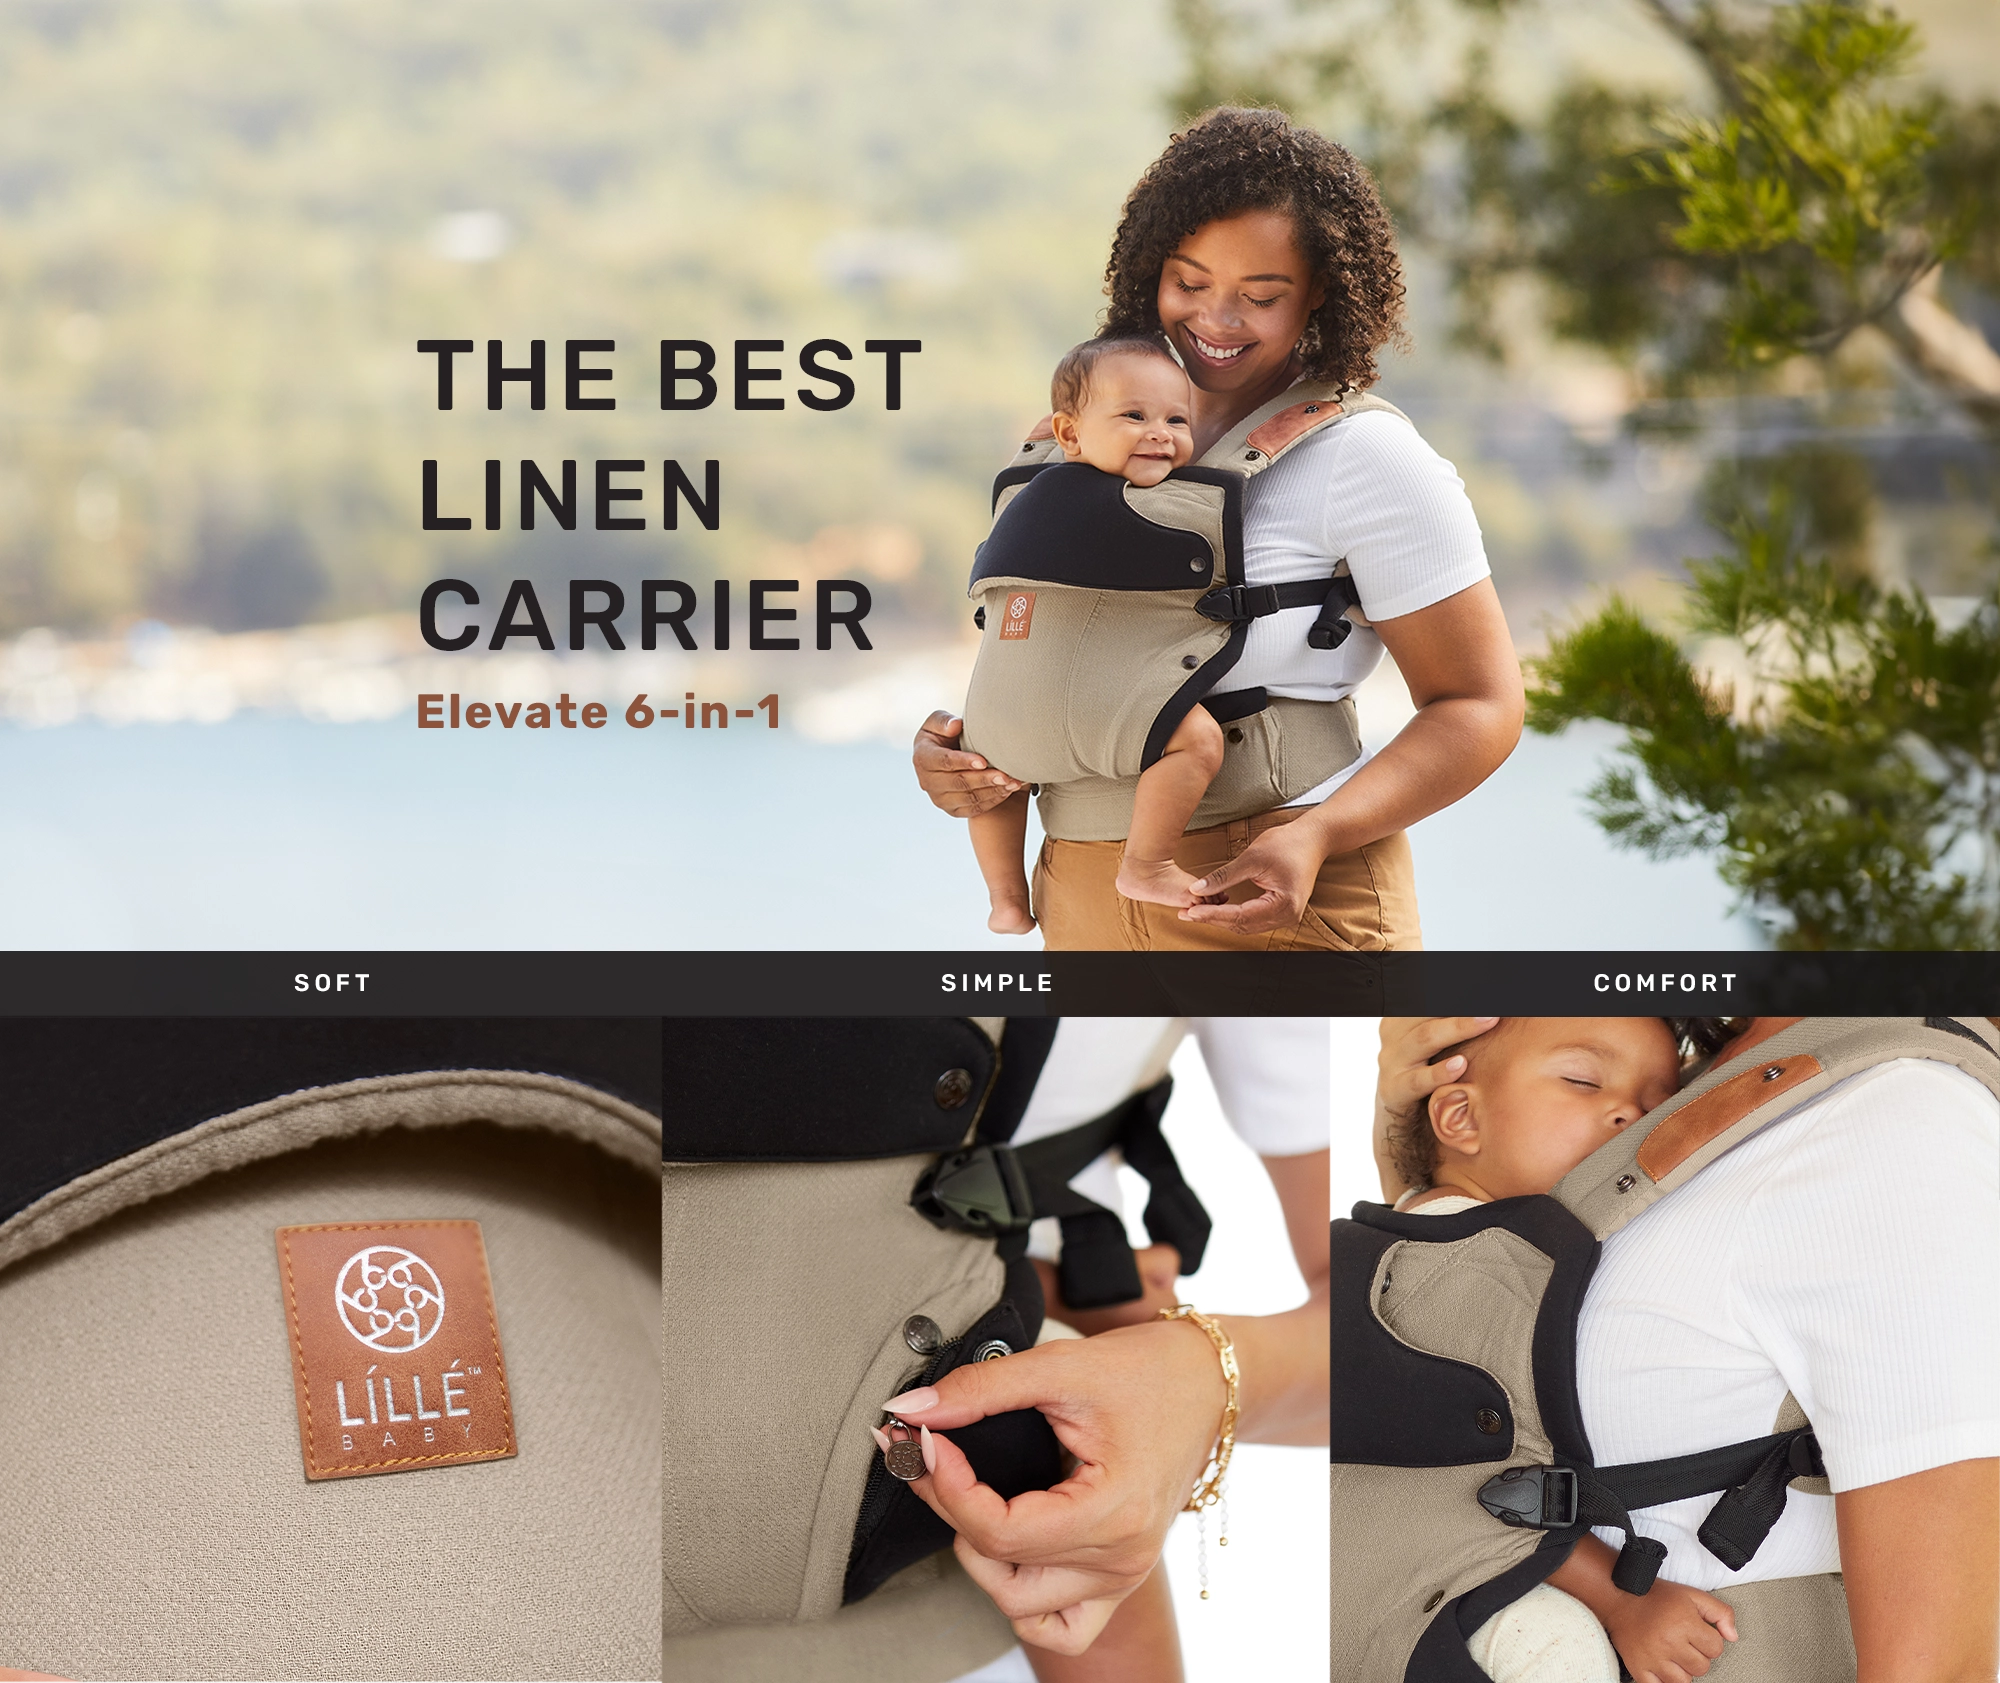 Lillebaby Elevate the best 6-in-1 linen carrier featuring soft, simple, comfort